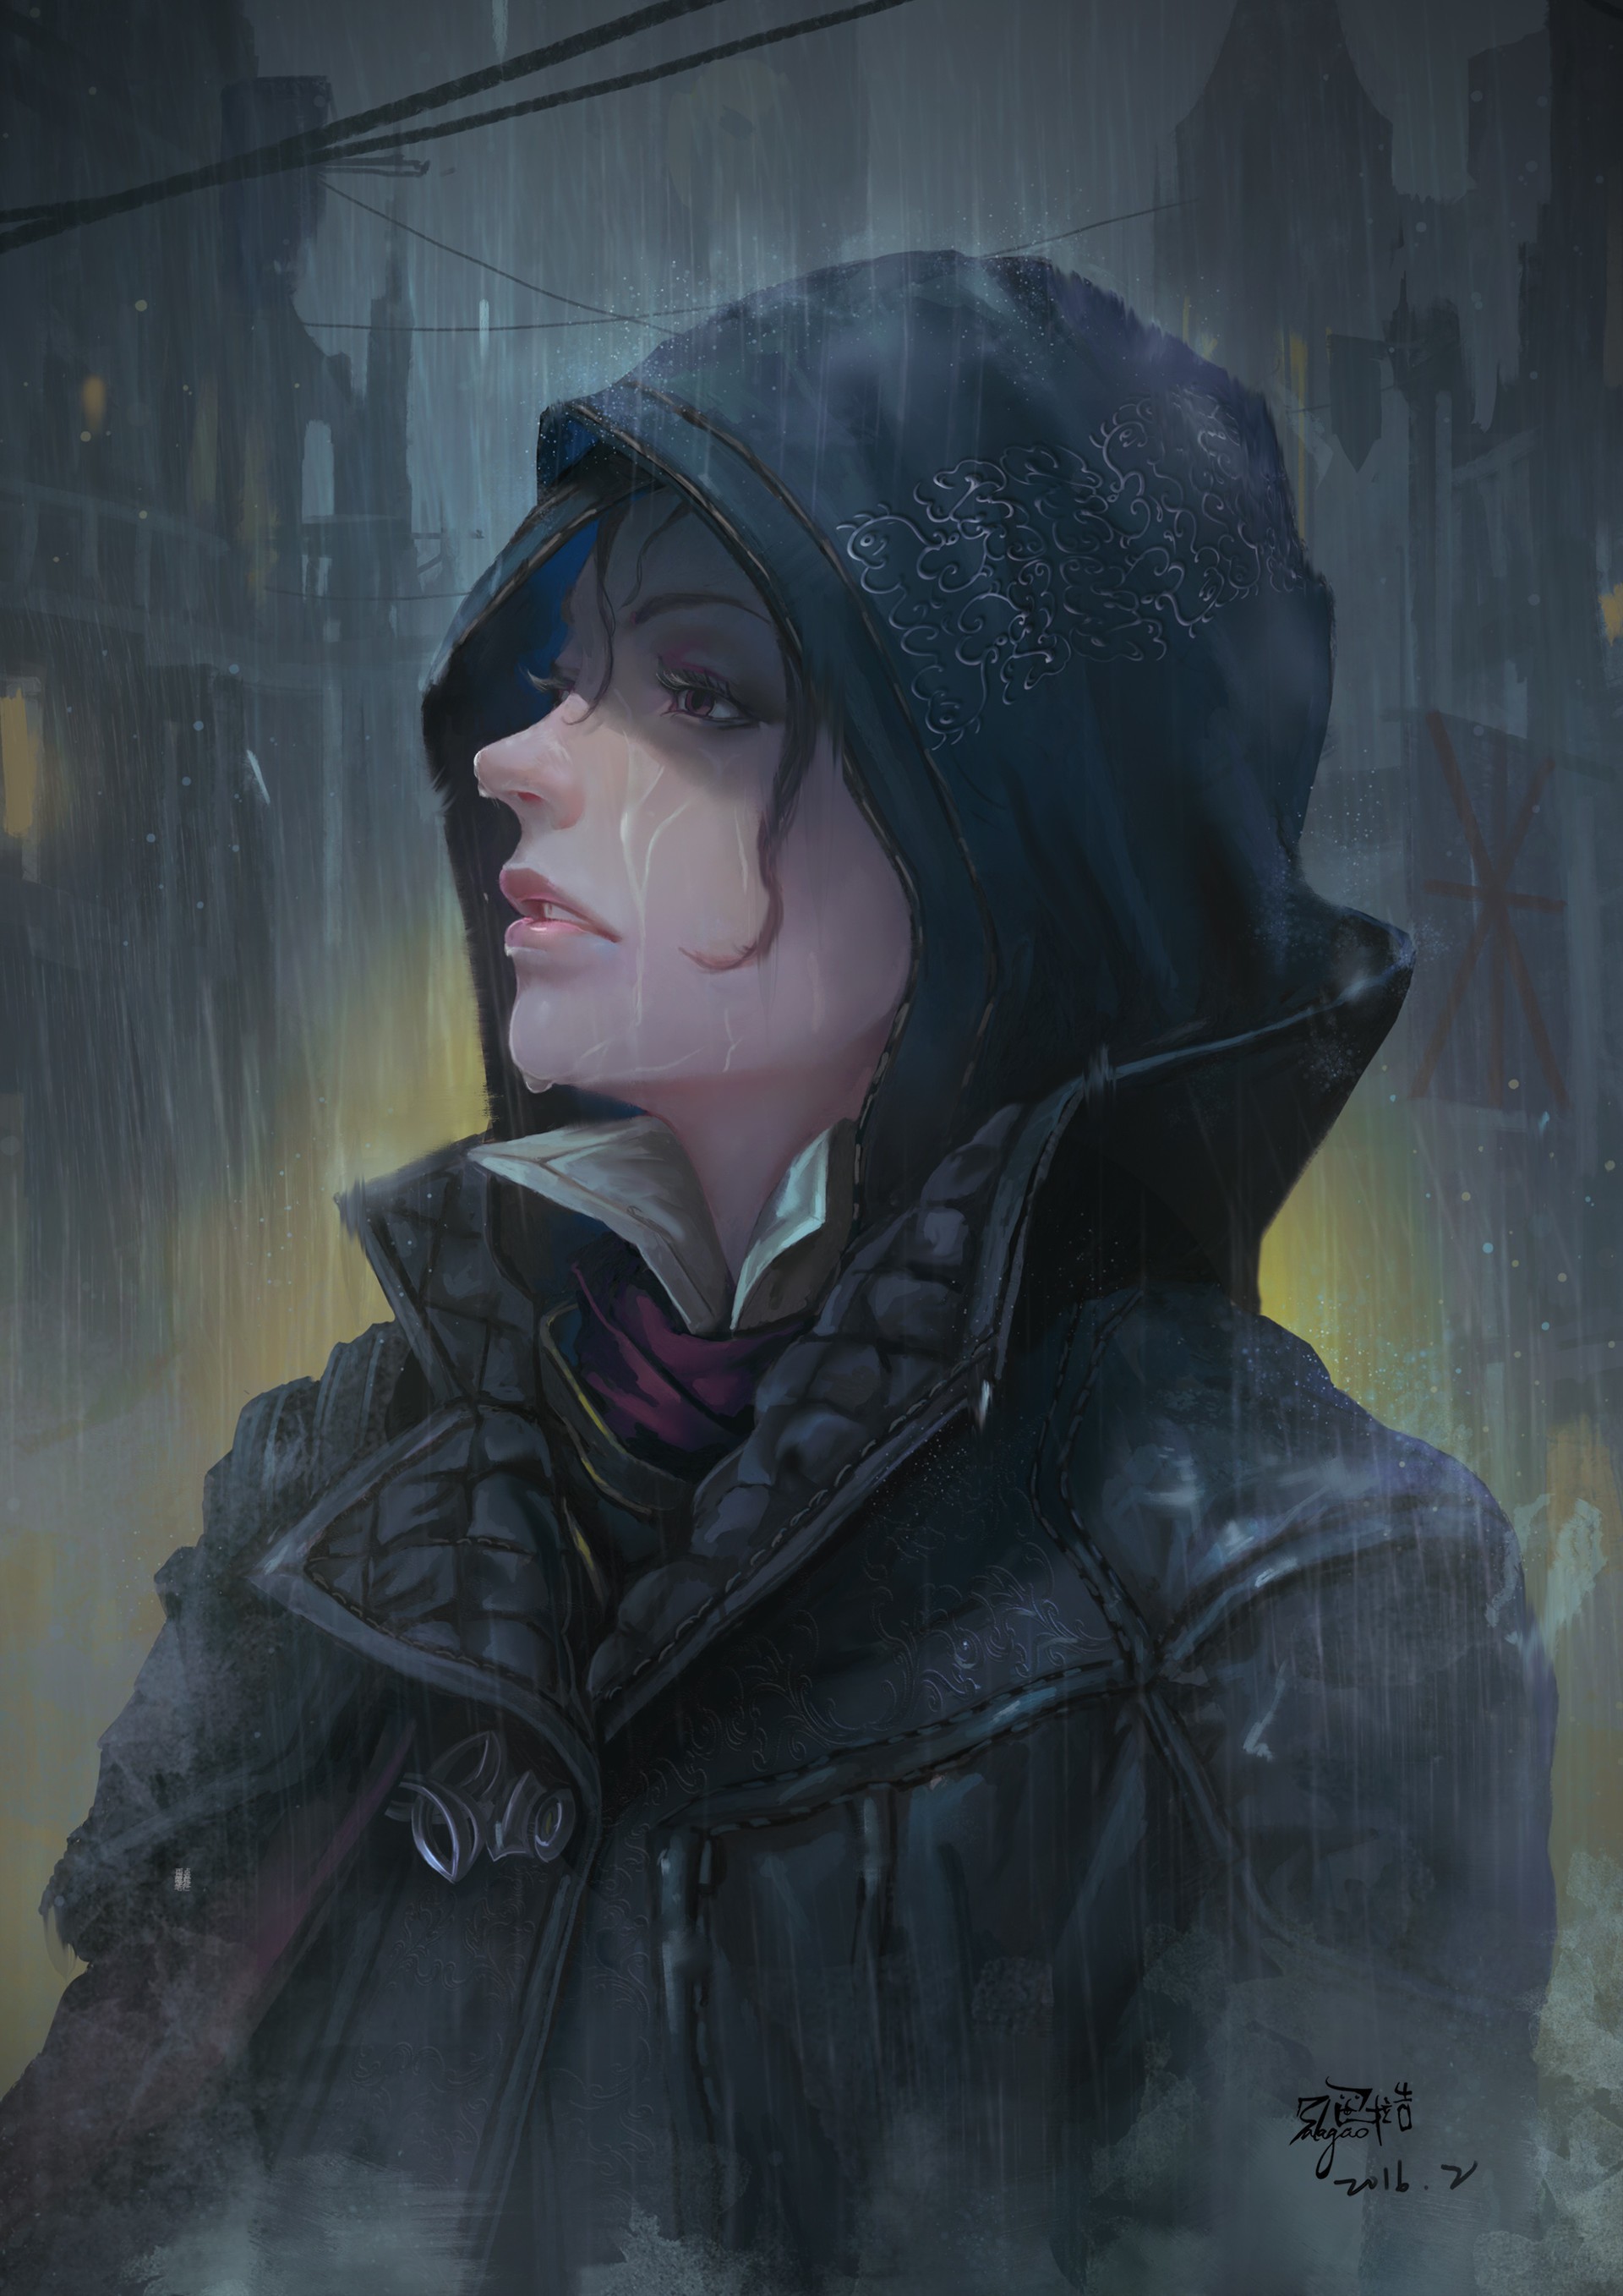 General 1920x2716 video game girls Evie Frye video games PC gaming fan art watermarked hoods face video game art Assassin's Creed Syndicate